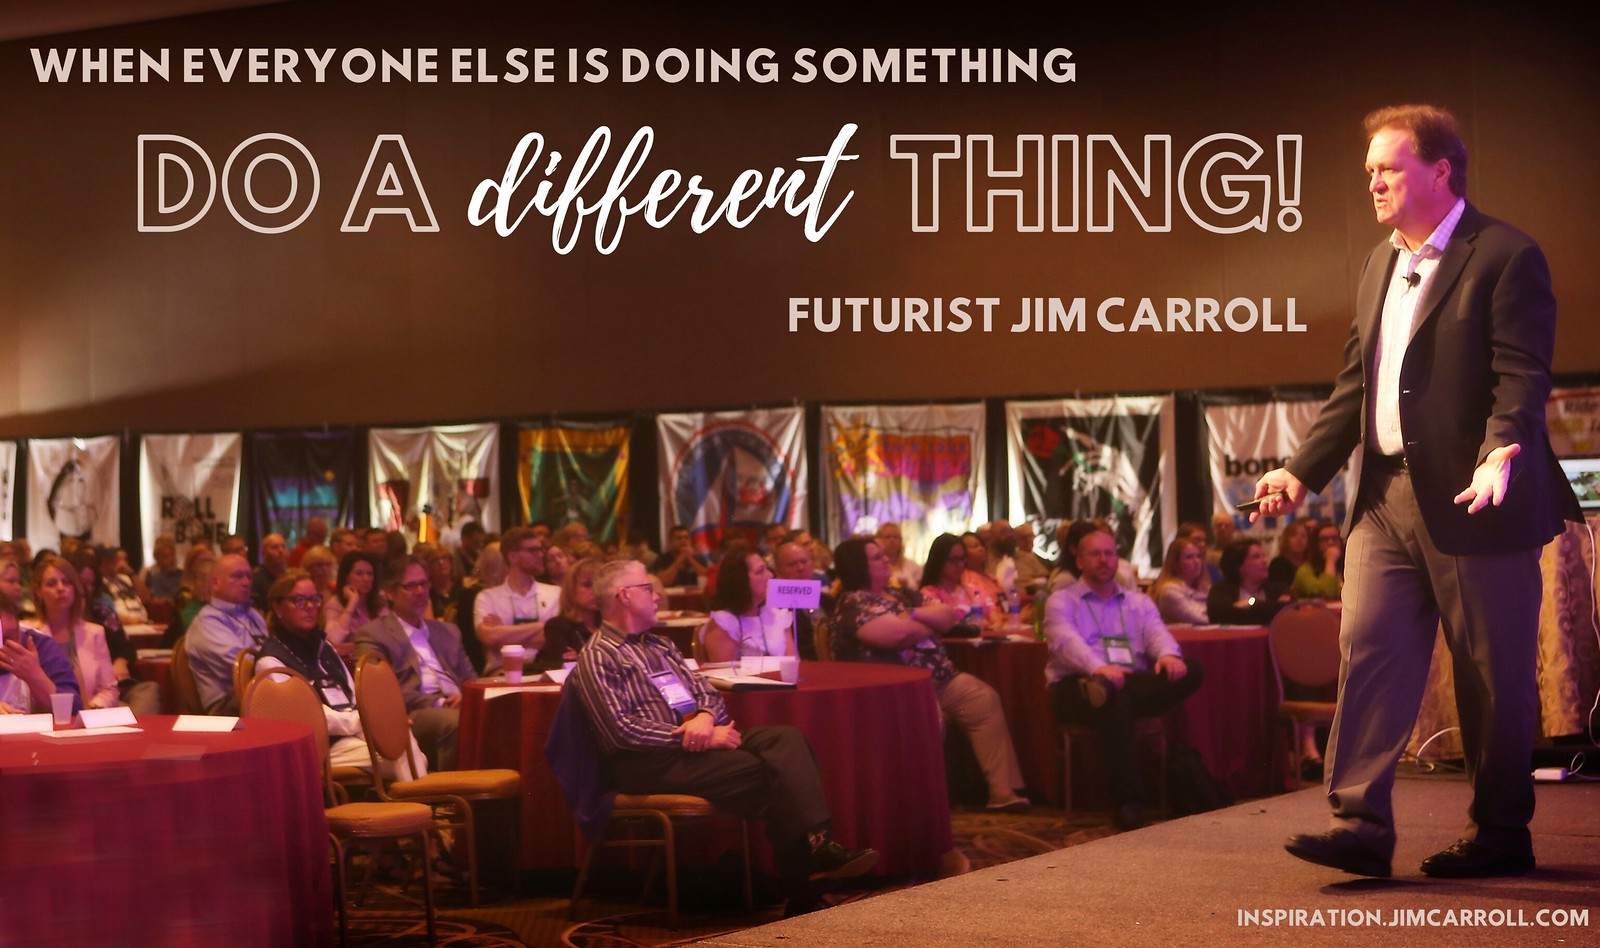 "When everyone else is doing something, do a different thing!" - Futurist Jim Carroll